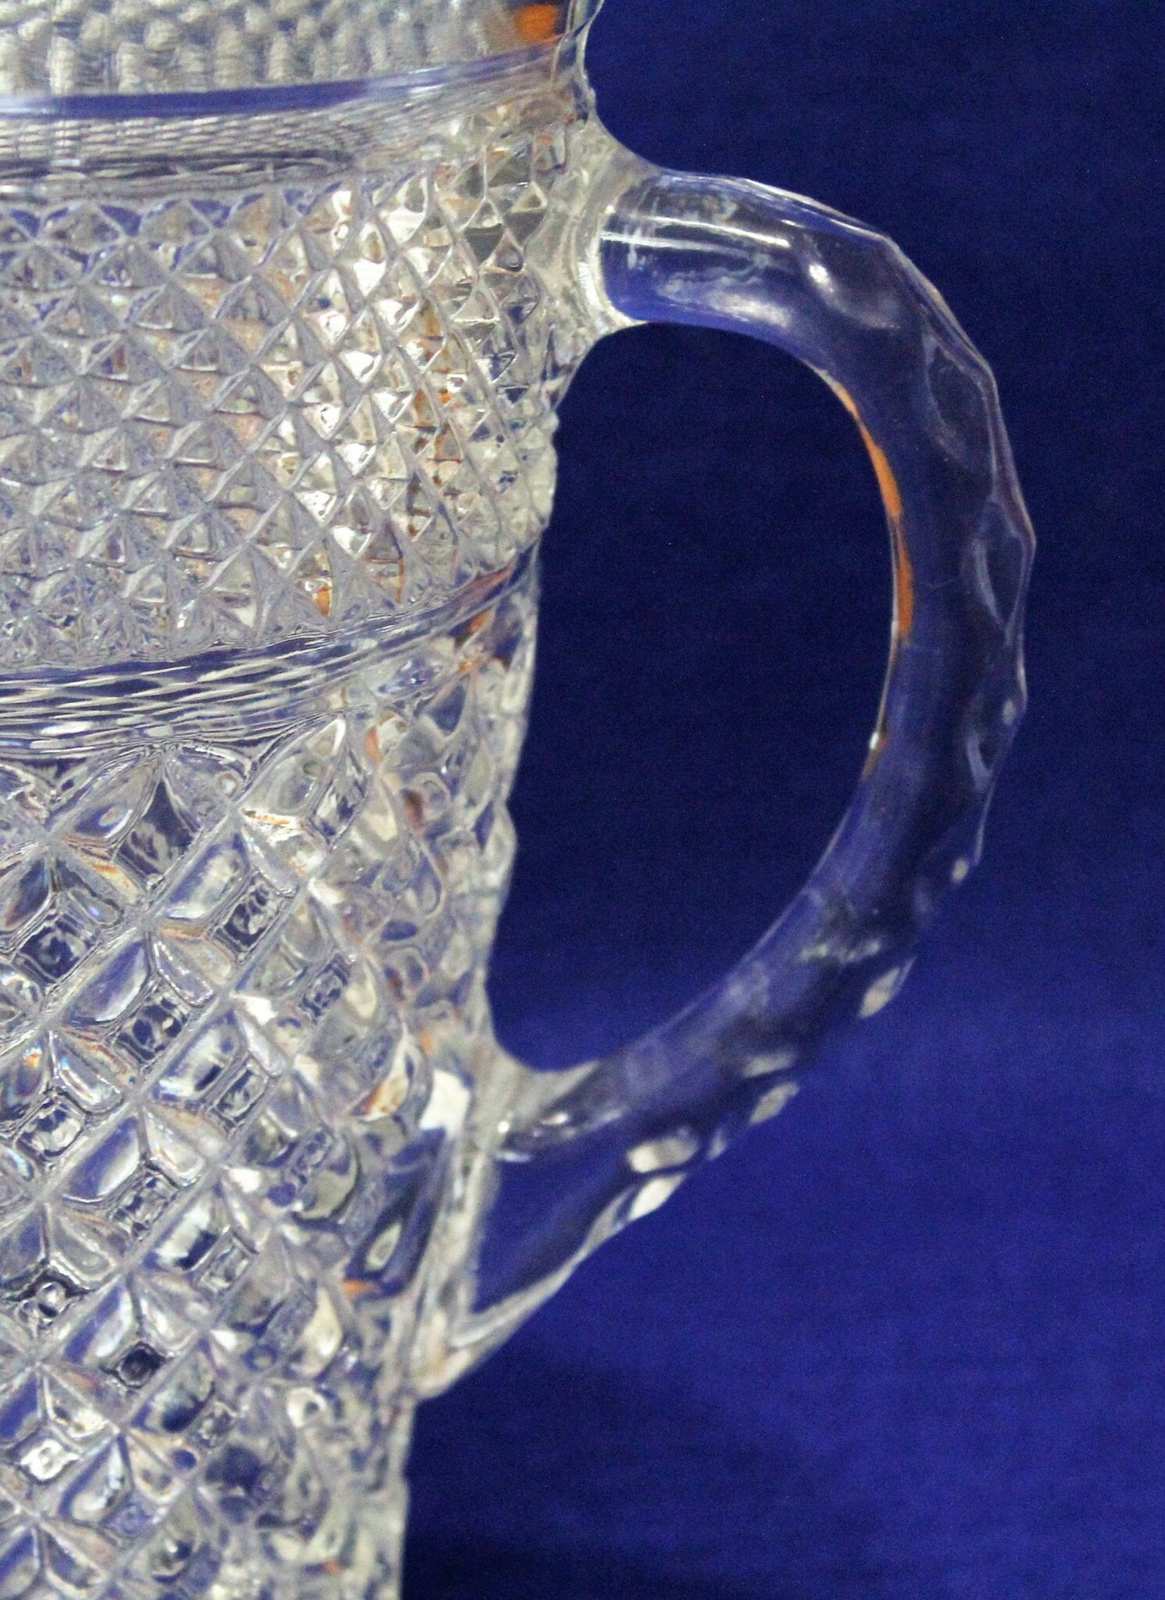 Vintage Anchor Hocking Oyster & Pearls 4.5 Small Clear Glass Pitcher